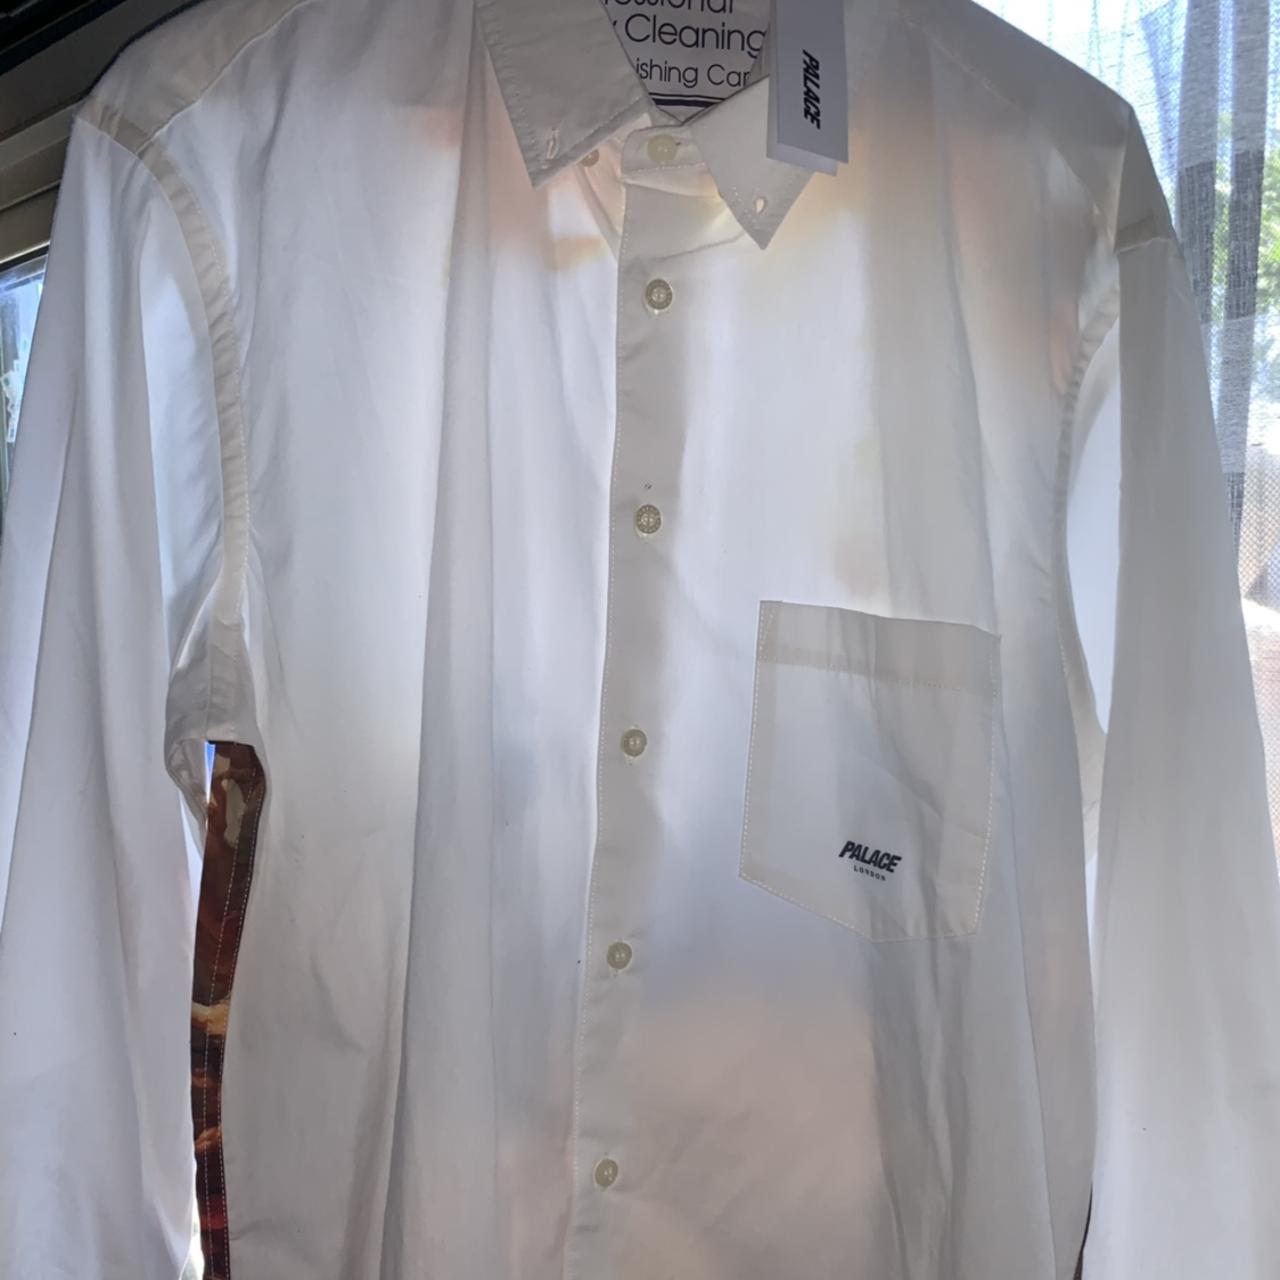 - Palace persailles shirt , - DSWT, - Price is firm...